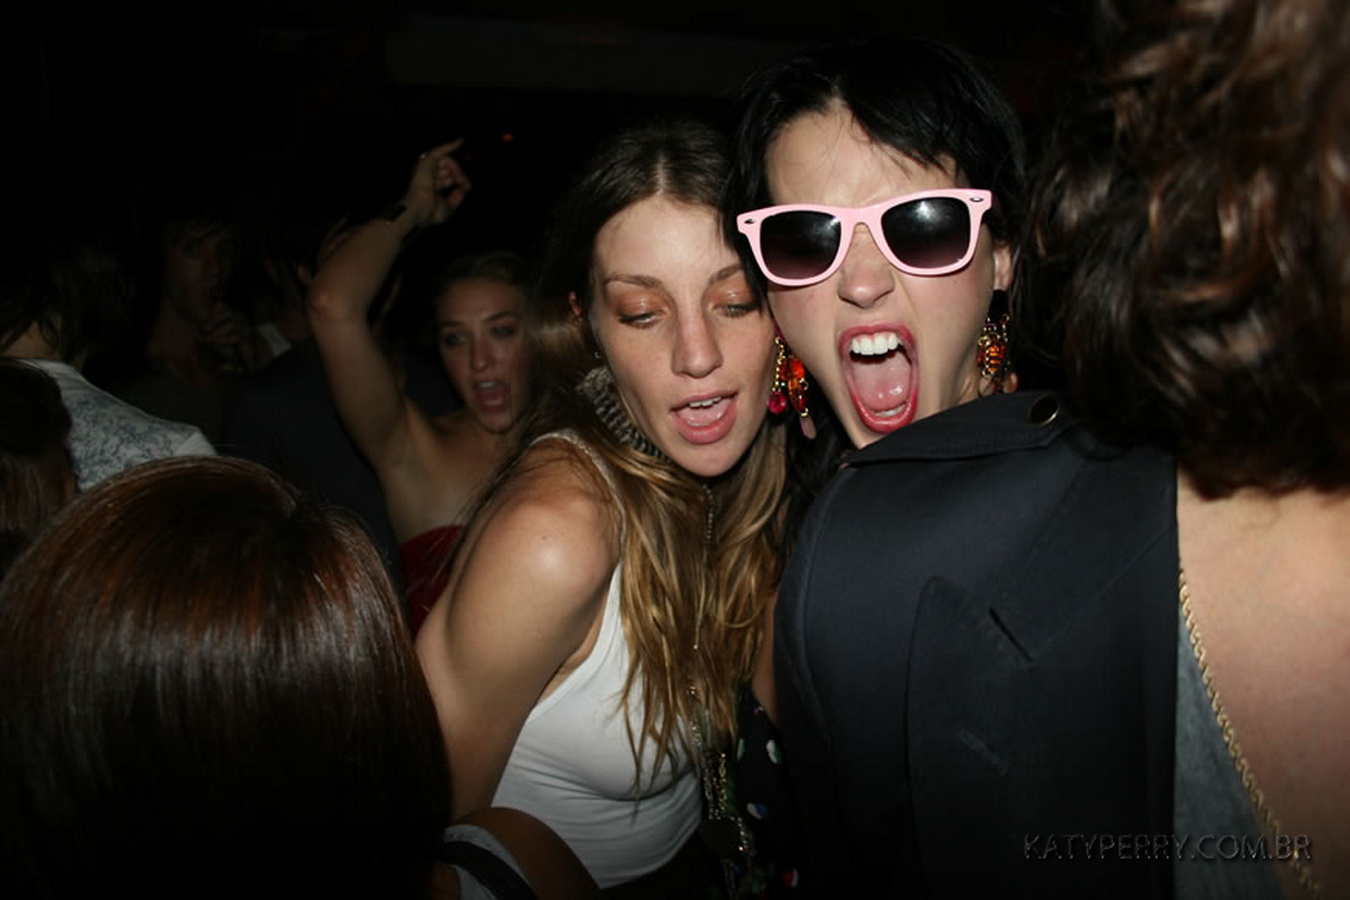 Katy_Perry_bobsslip_drunk_cleavage_downblouse_upskirt_nipslip_at_her_birthday_2007_party_99x_HQ_31.jpg